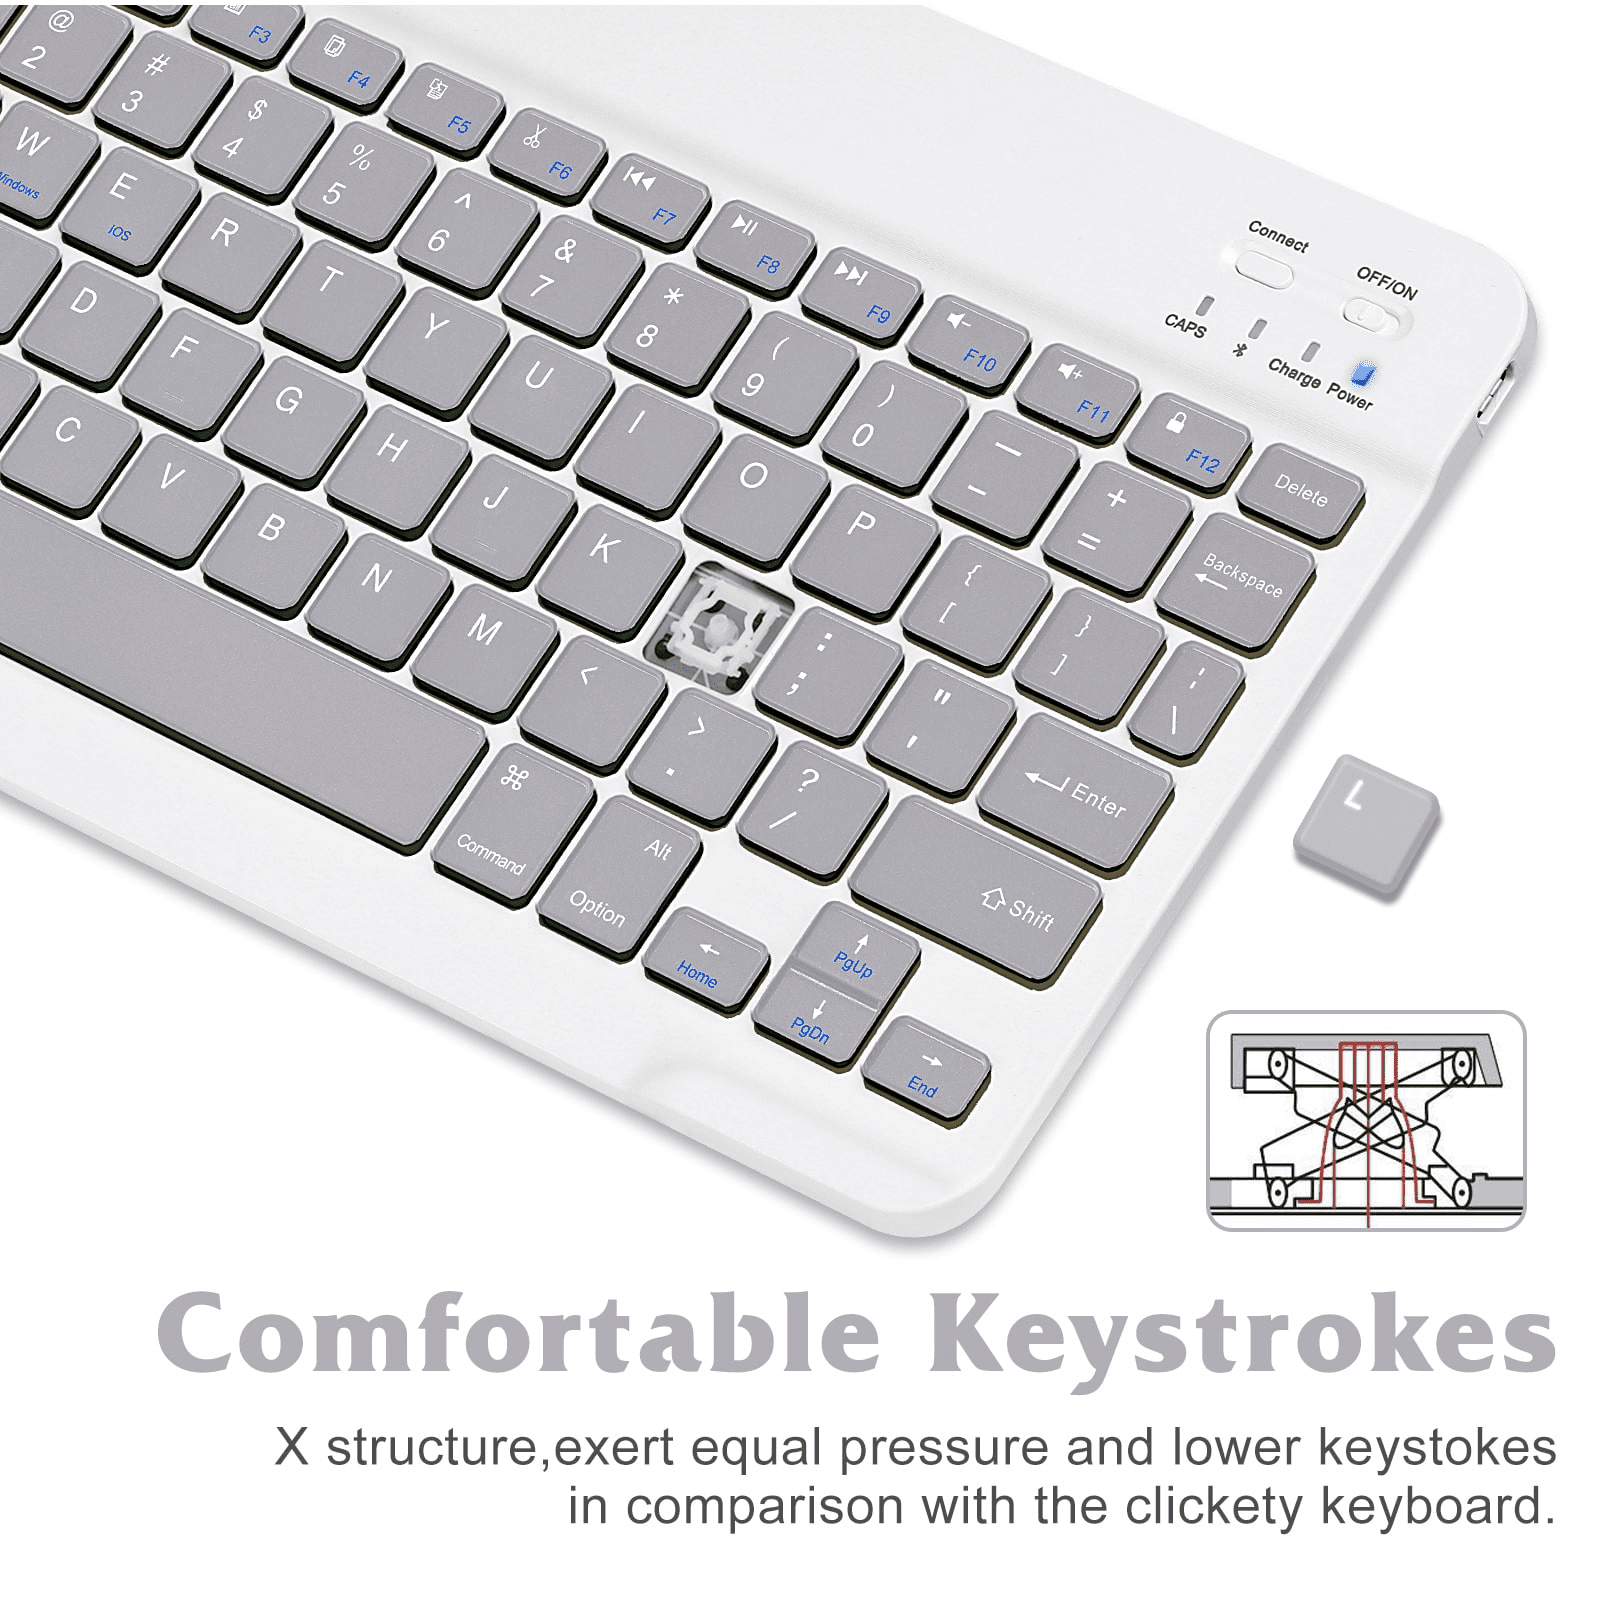 Ultra-Slim Bluetooth rechargeable Keyboard for TCL 10 TabMax and all  Bluetooth Enabled iPads, iPhones, Android Tablets, Smartphones, Windows pc  Onyx Black